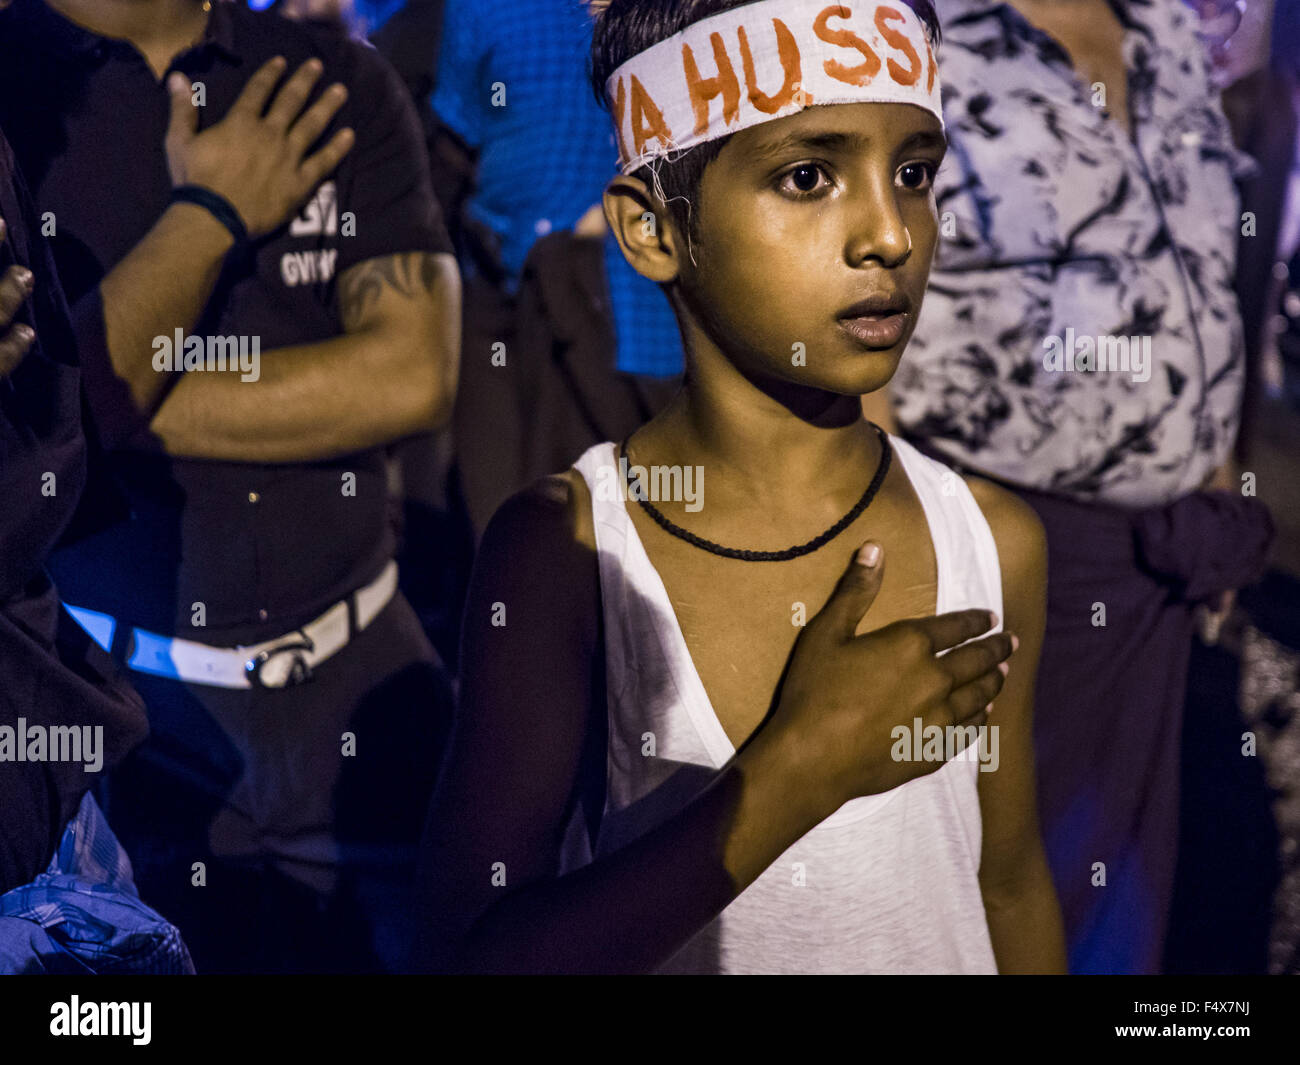 Yangon, Yangon Division, Myanmar. 24th Oct, 2015. A Shia boy pounds his chest during Ashura observances at Mogul Mosque in Yangon. Ashura commemorates the death of Hussein ibn Ali, the grandson of the Prophet Muhammed, in the 7th century. Hussein ibn Ali is considered by Shia Muslims to be the third imam and the rightful successor of Muhammed. He was killed at the Battle of Karbala in 610 CE on the 10th day of Muharram, the first month of the Islamic calendar. According to Myanmar government statistics, only about 4% of the population is Muslim. Many Muslims have fled Myanmar in recent years Stock Photo